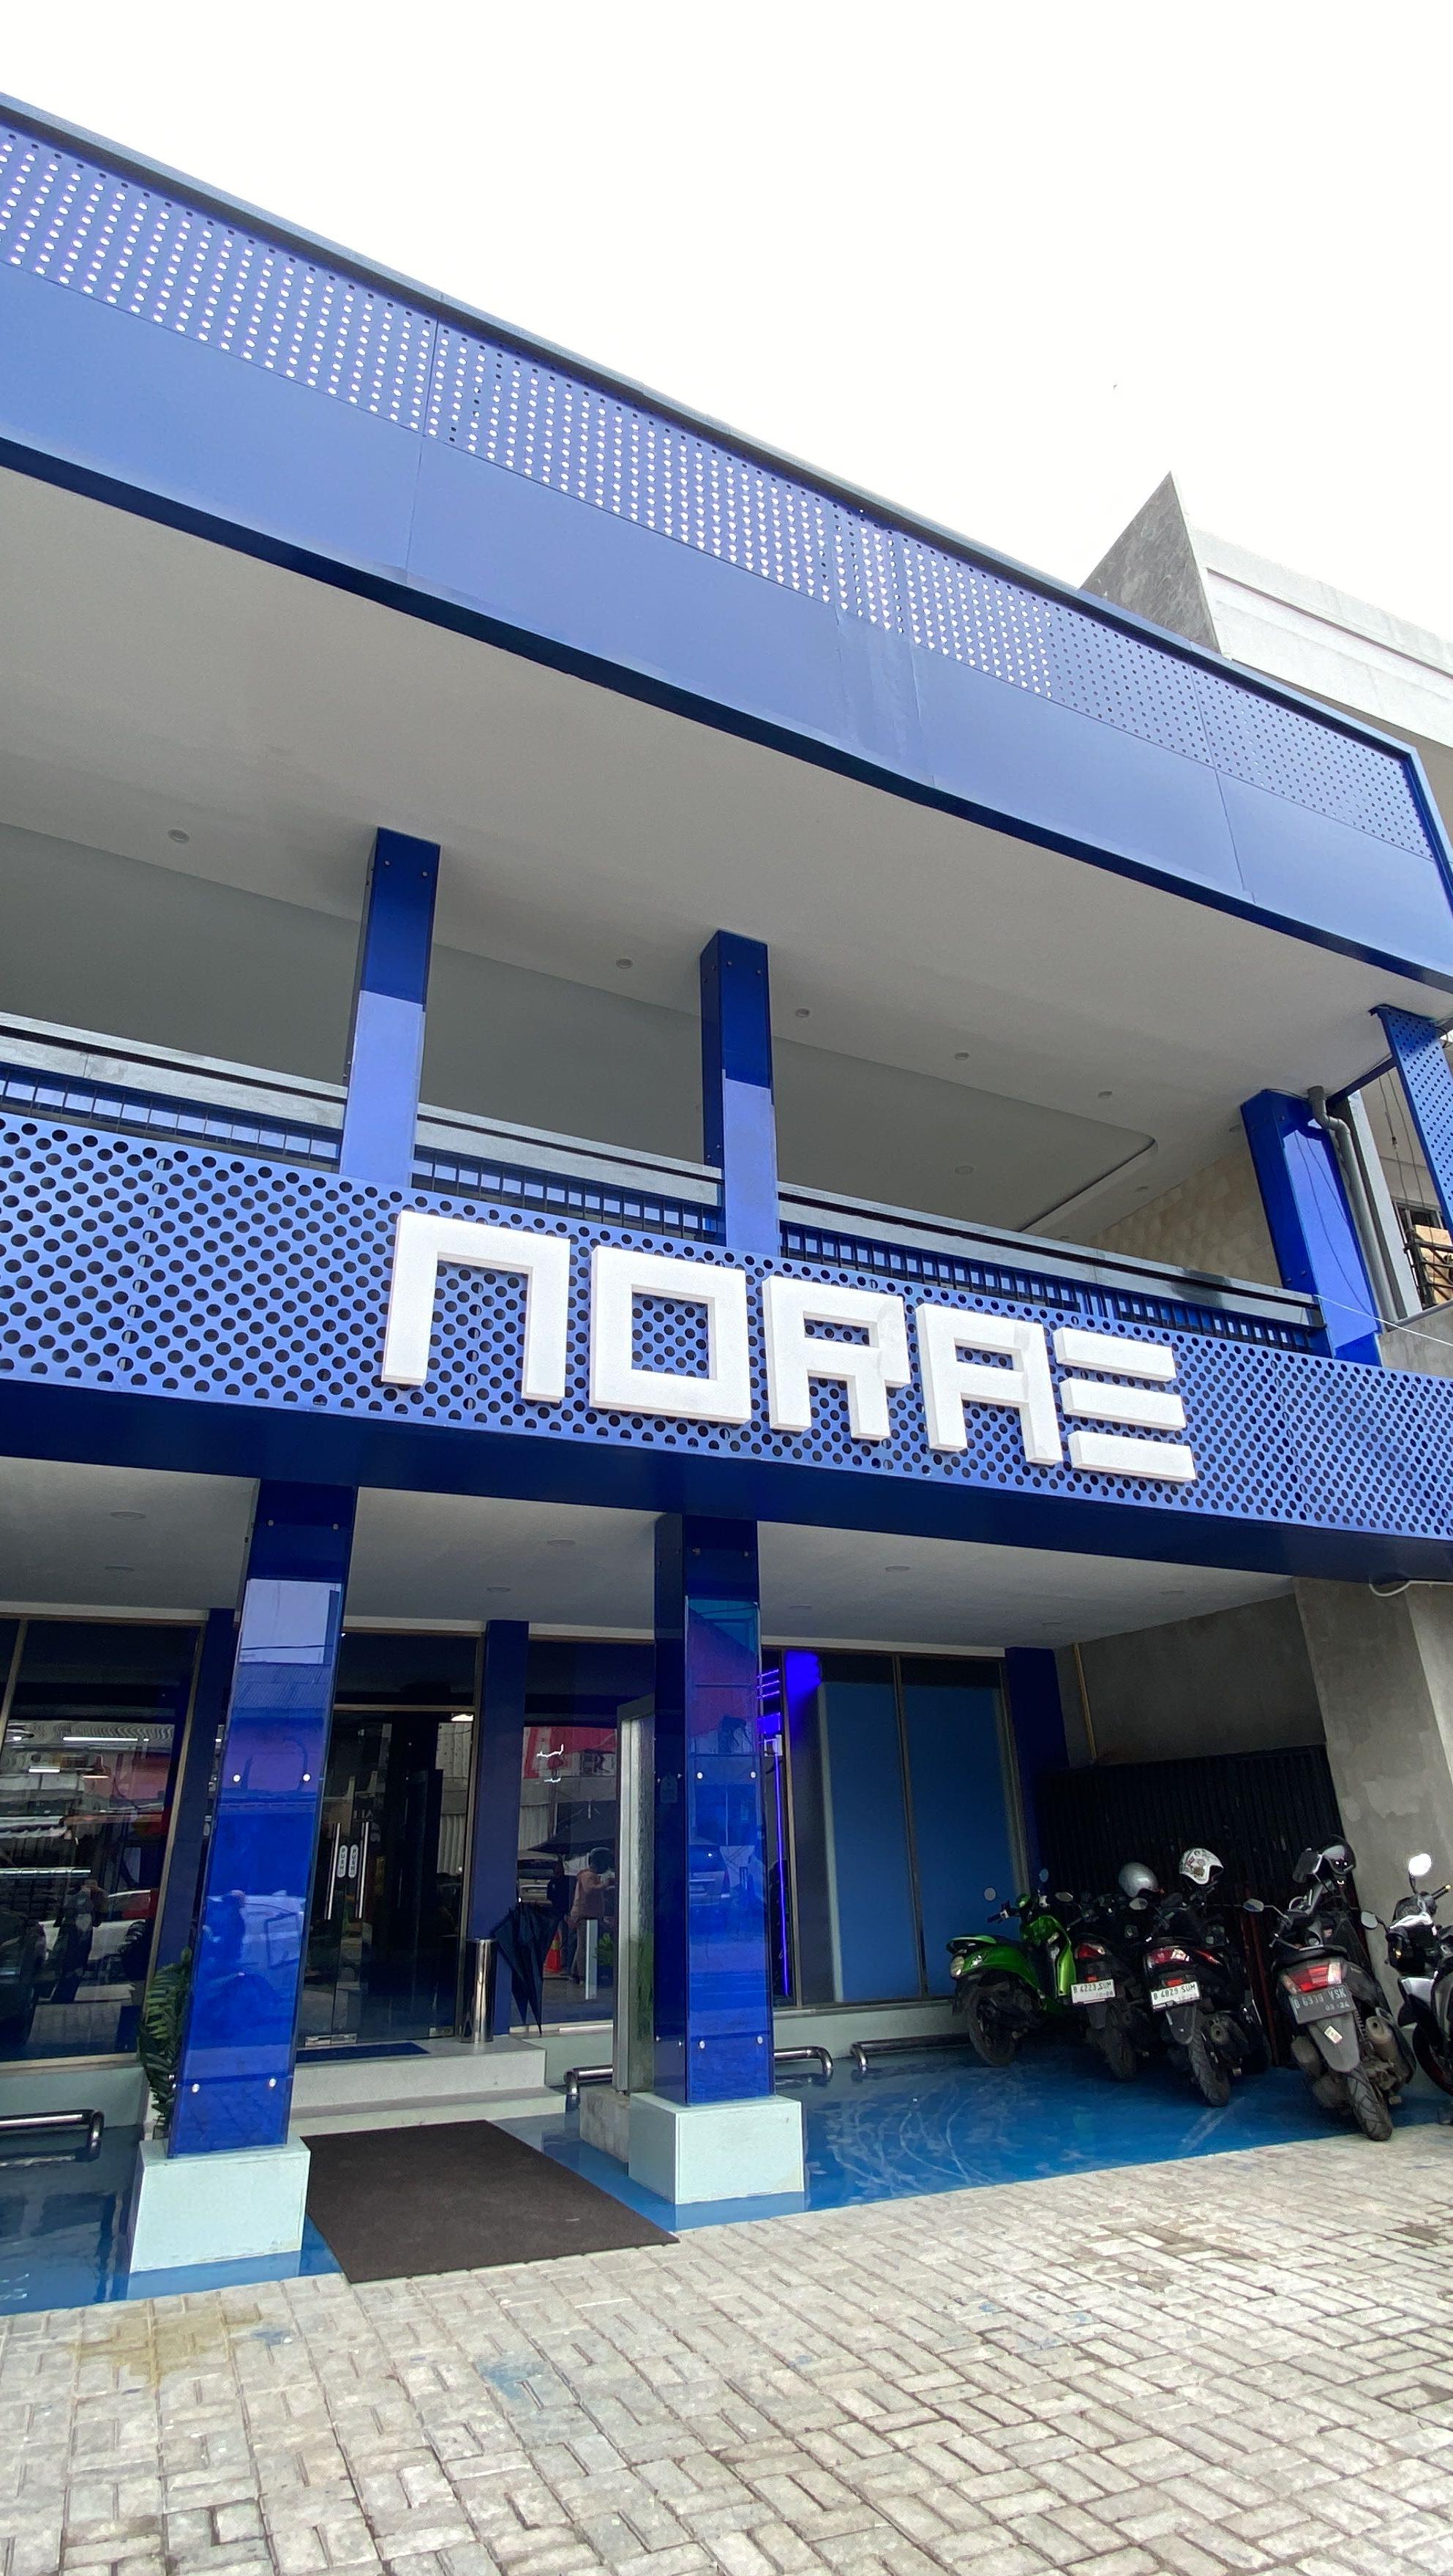 Norae - K-Food & Lifestyle review